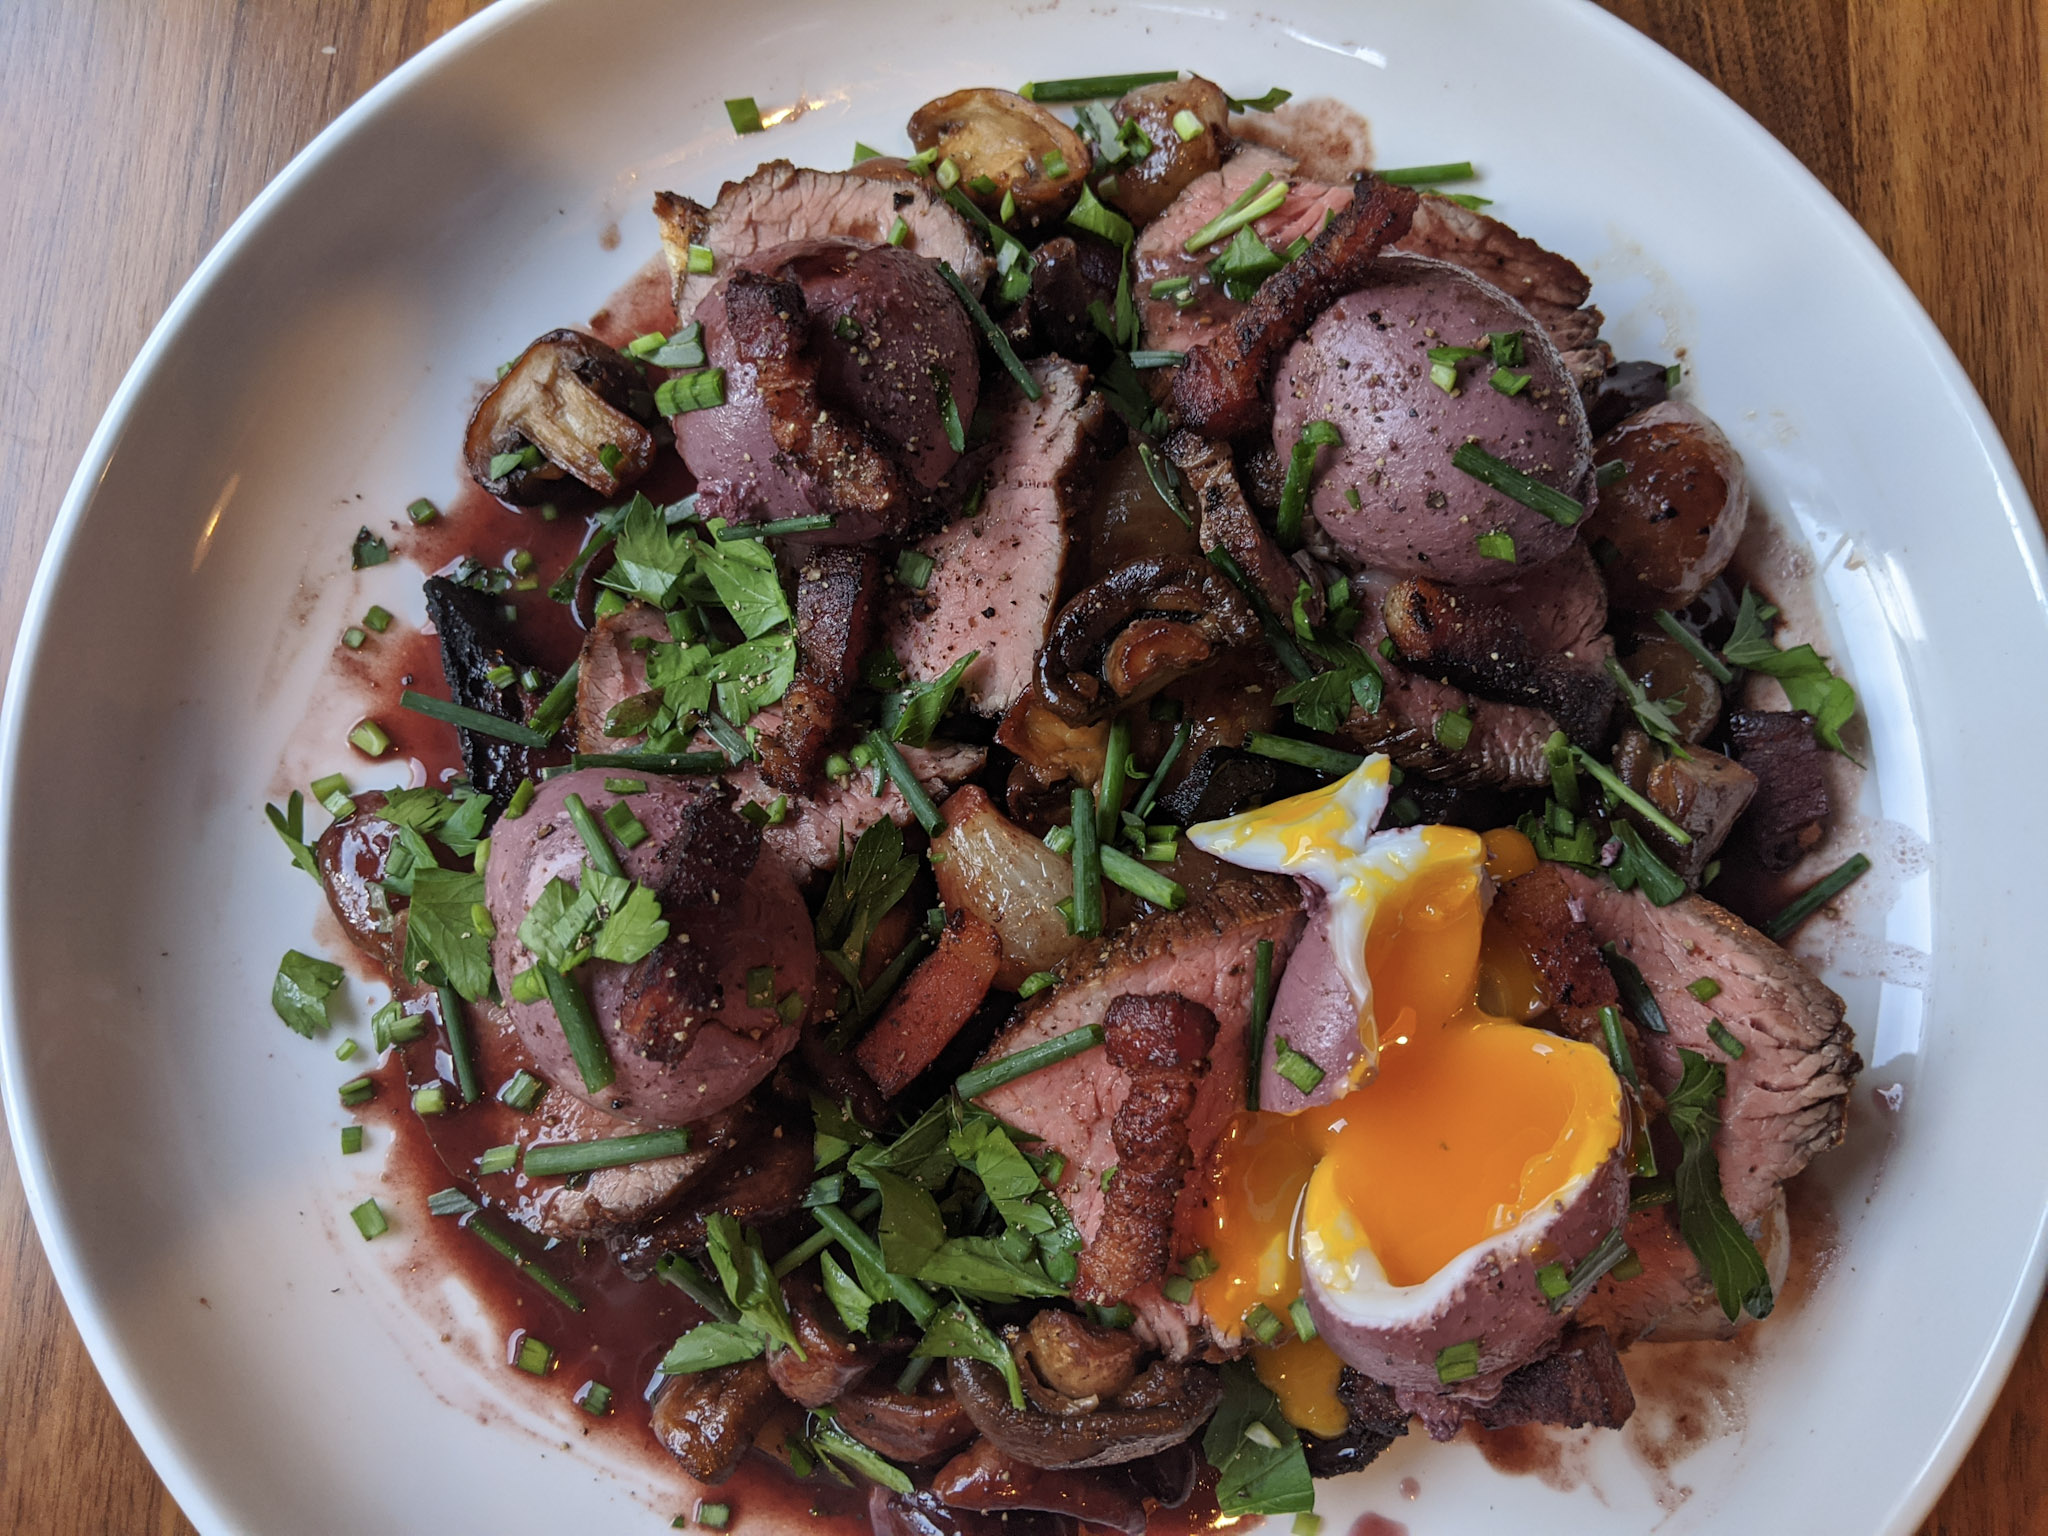 A plate of seared tri-tip steak and eggs en meurette poached in red wine with roasted mushrooms, onions and bacon rests on a wide white plate.